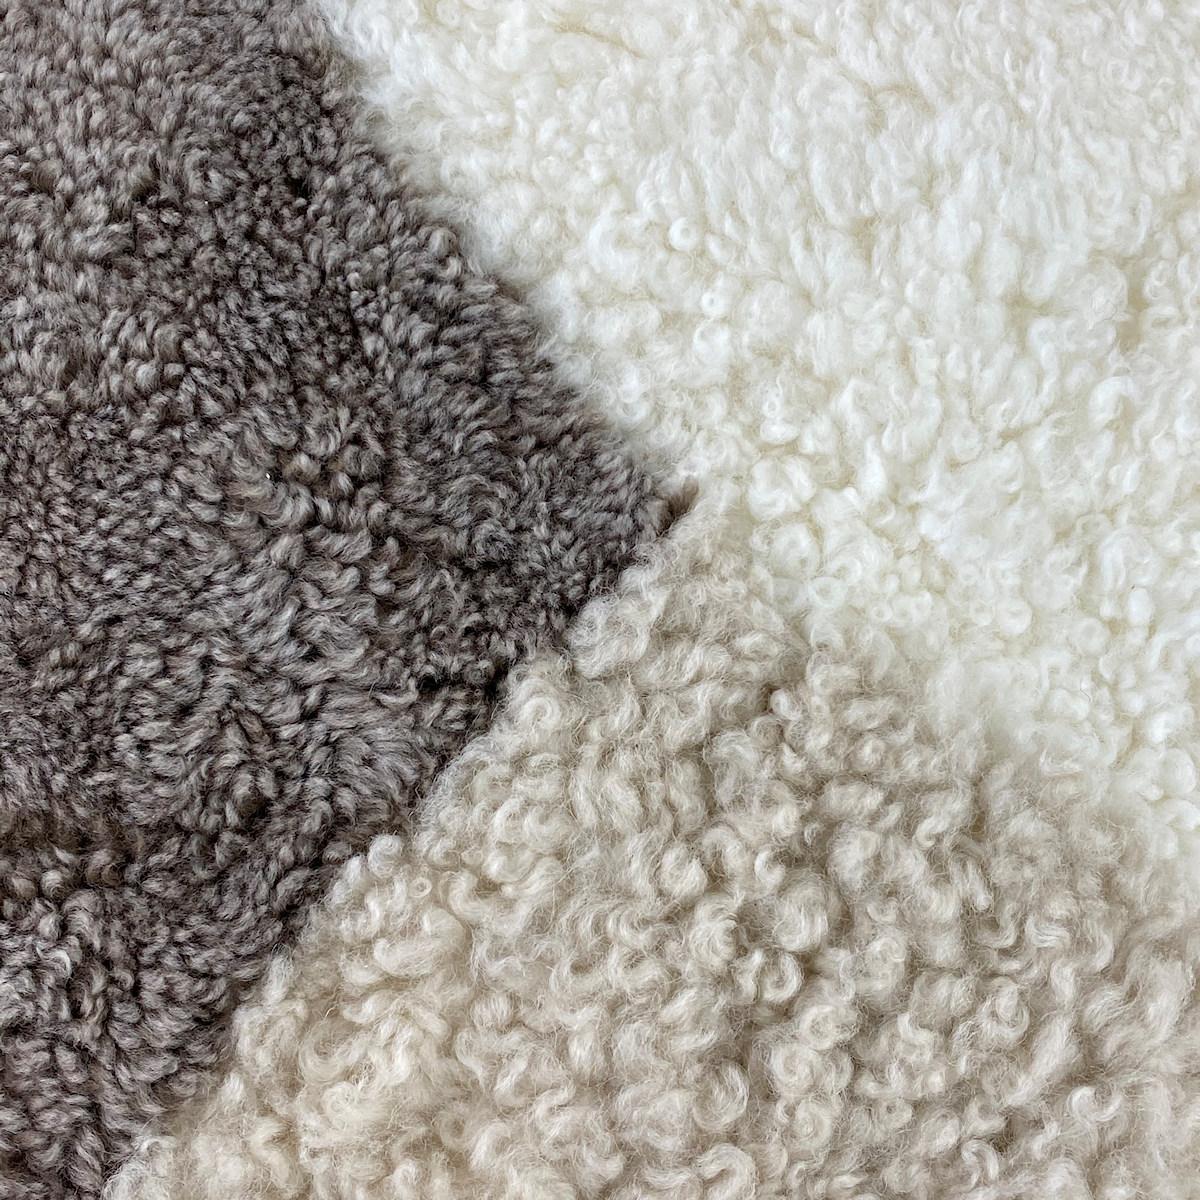 Introduce comfort and an expression of sustainable living found in this stone shearling sheepskin abstract pillow. The boucle style wool pile features a short curly wool that will bring a room to life, injecting charming tactile elements translating